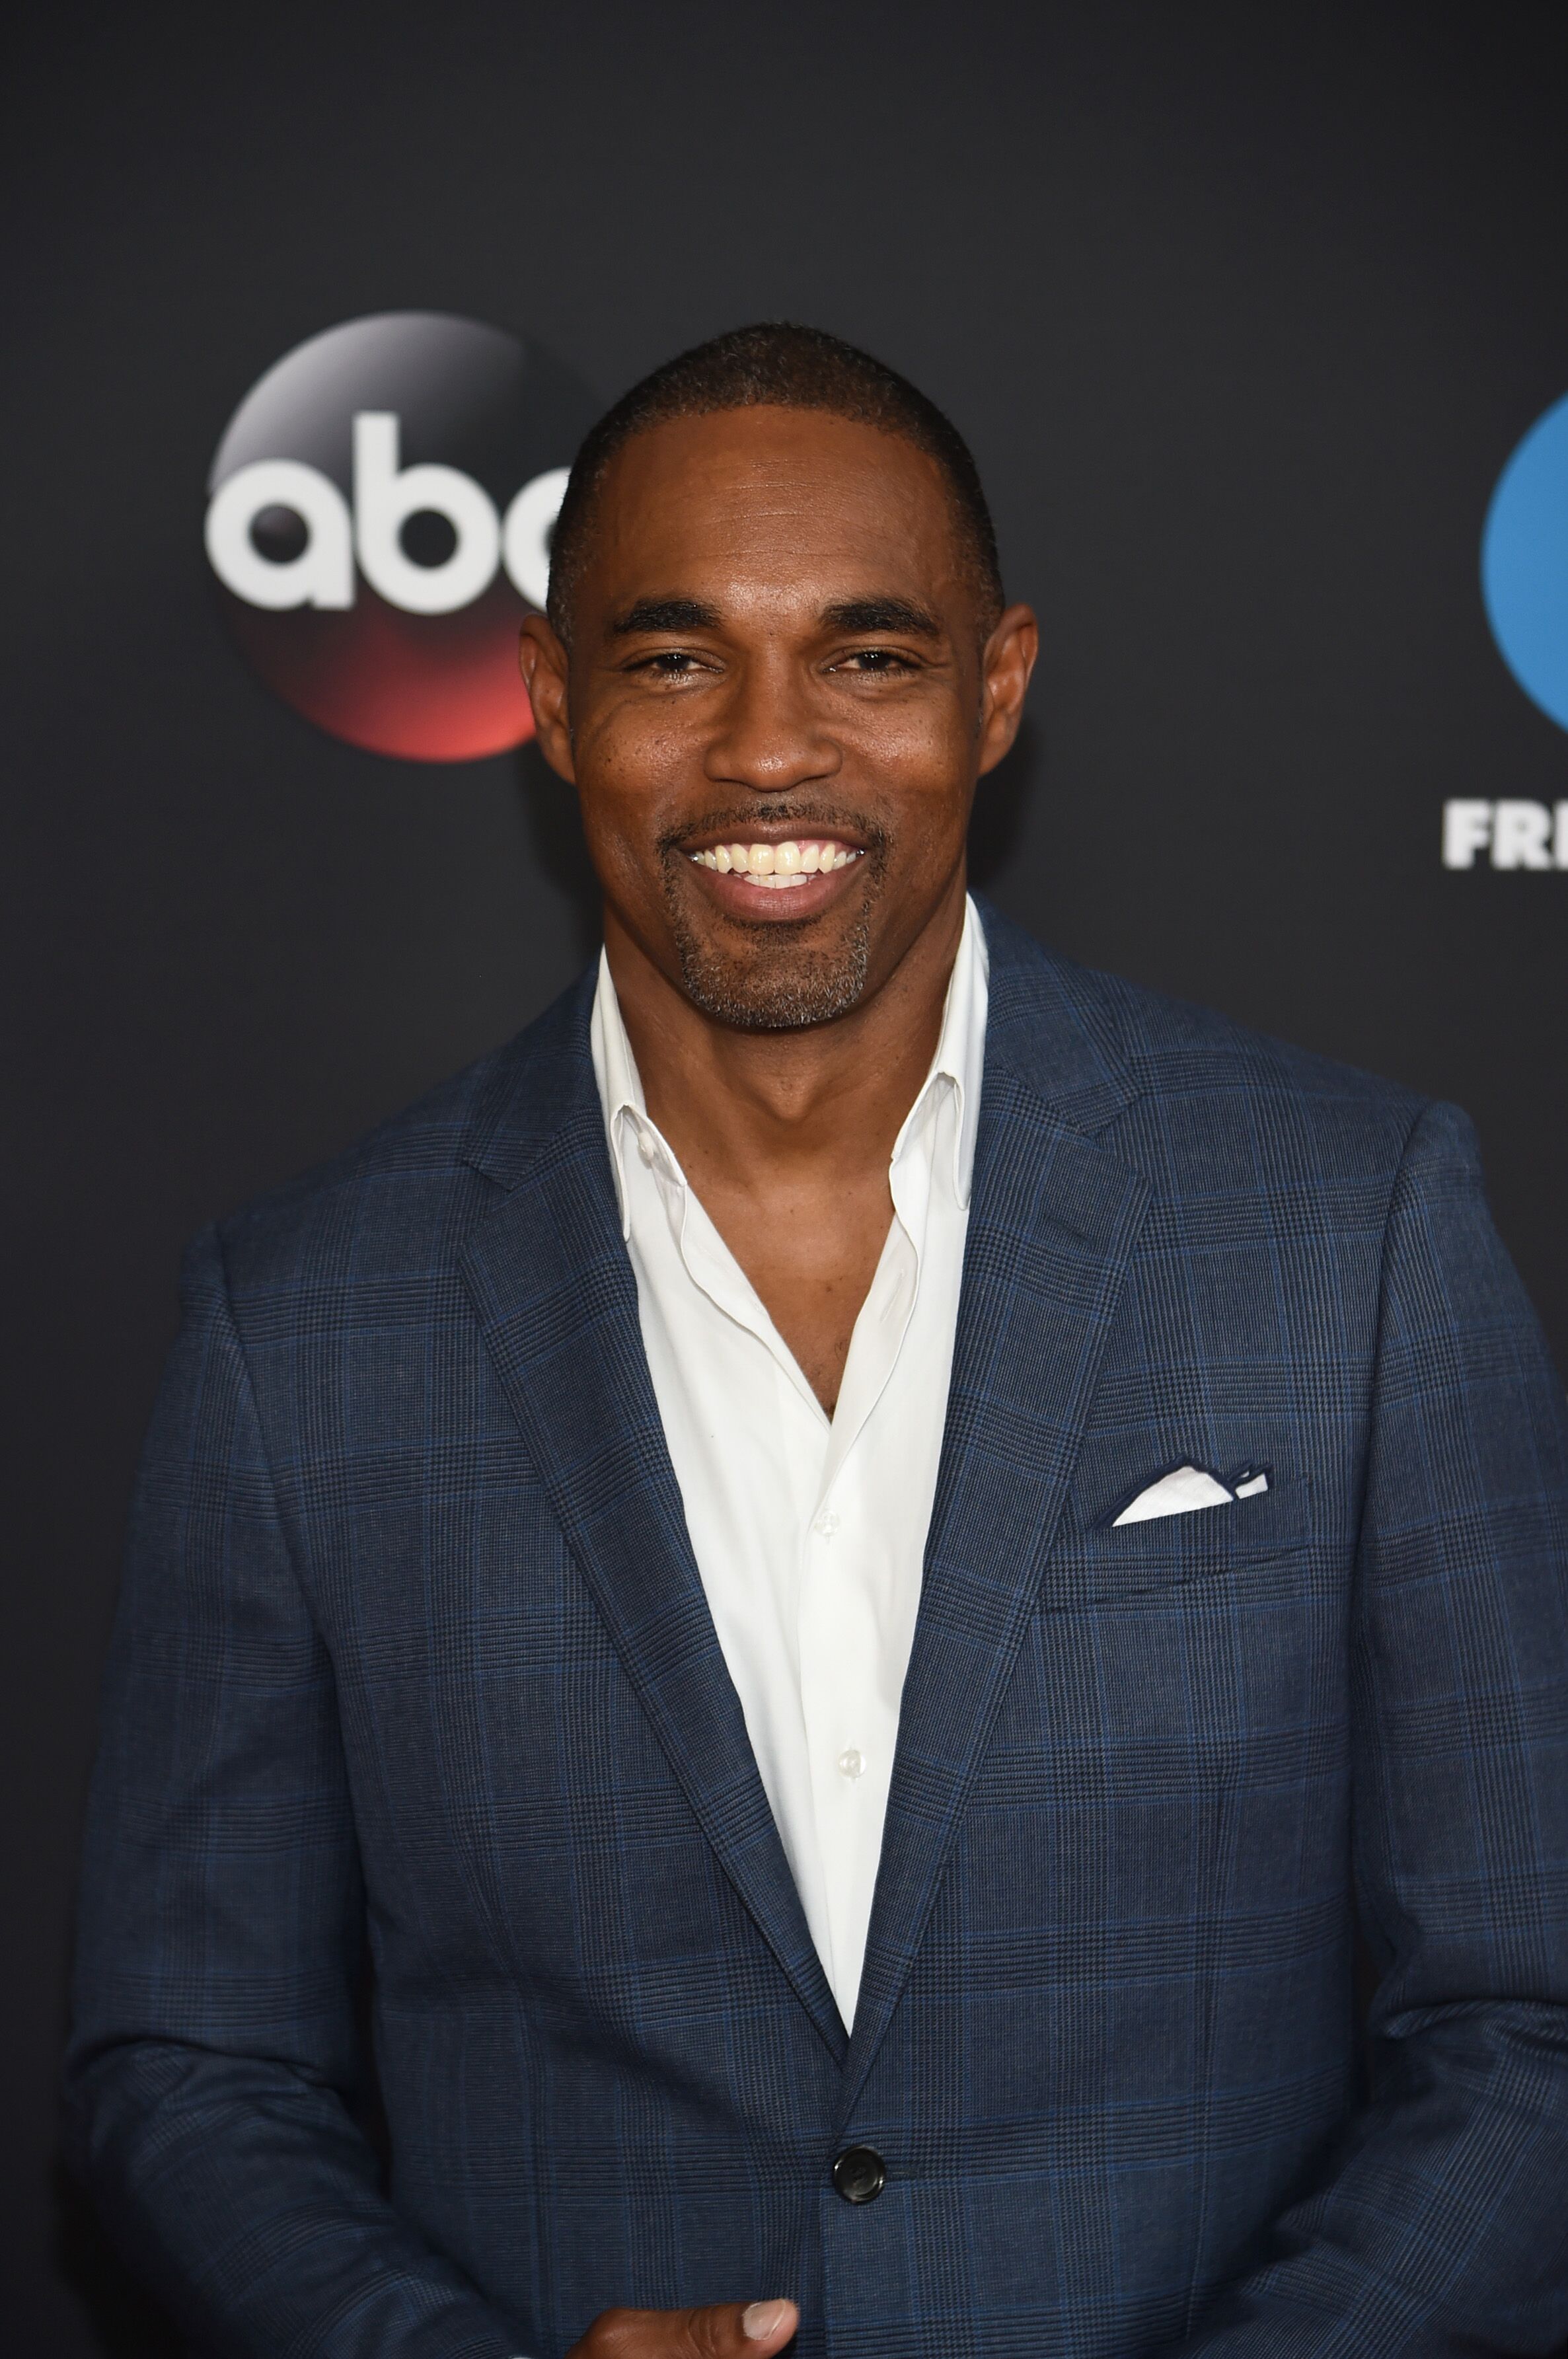 Jason George of Station 19 attends the 2018 Disney, ABC, Freeform Upfront at Tavern On The Green on May 15, 2018. | Photo: Getty Images